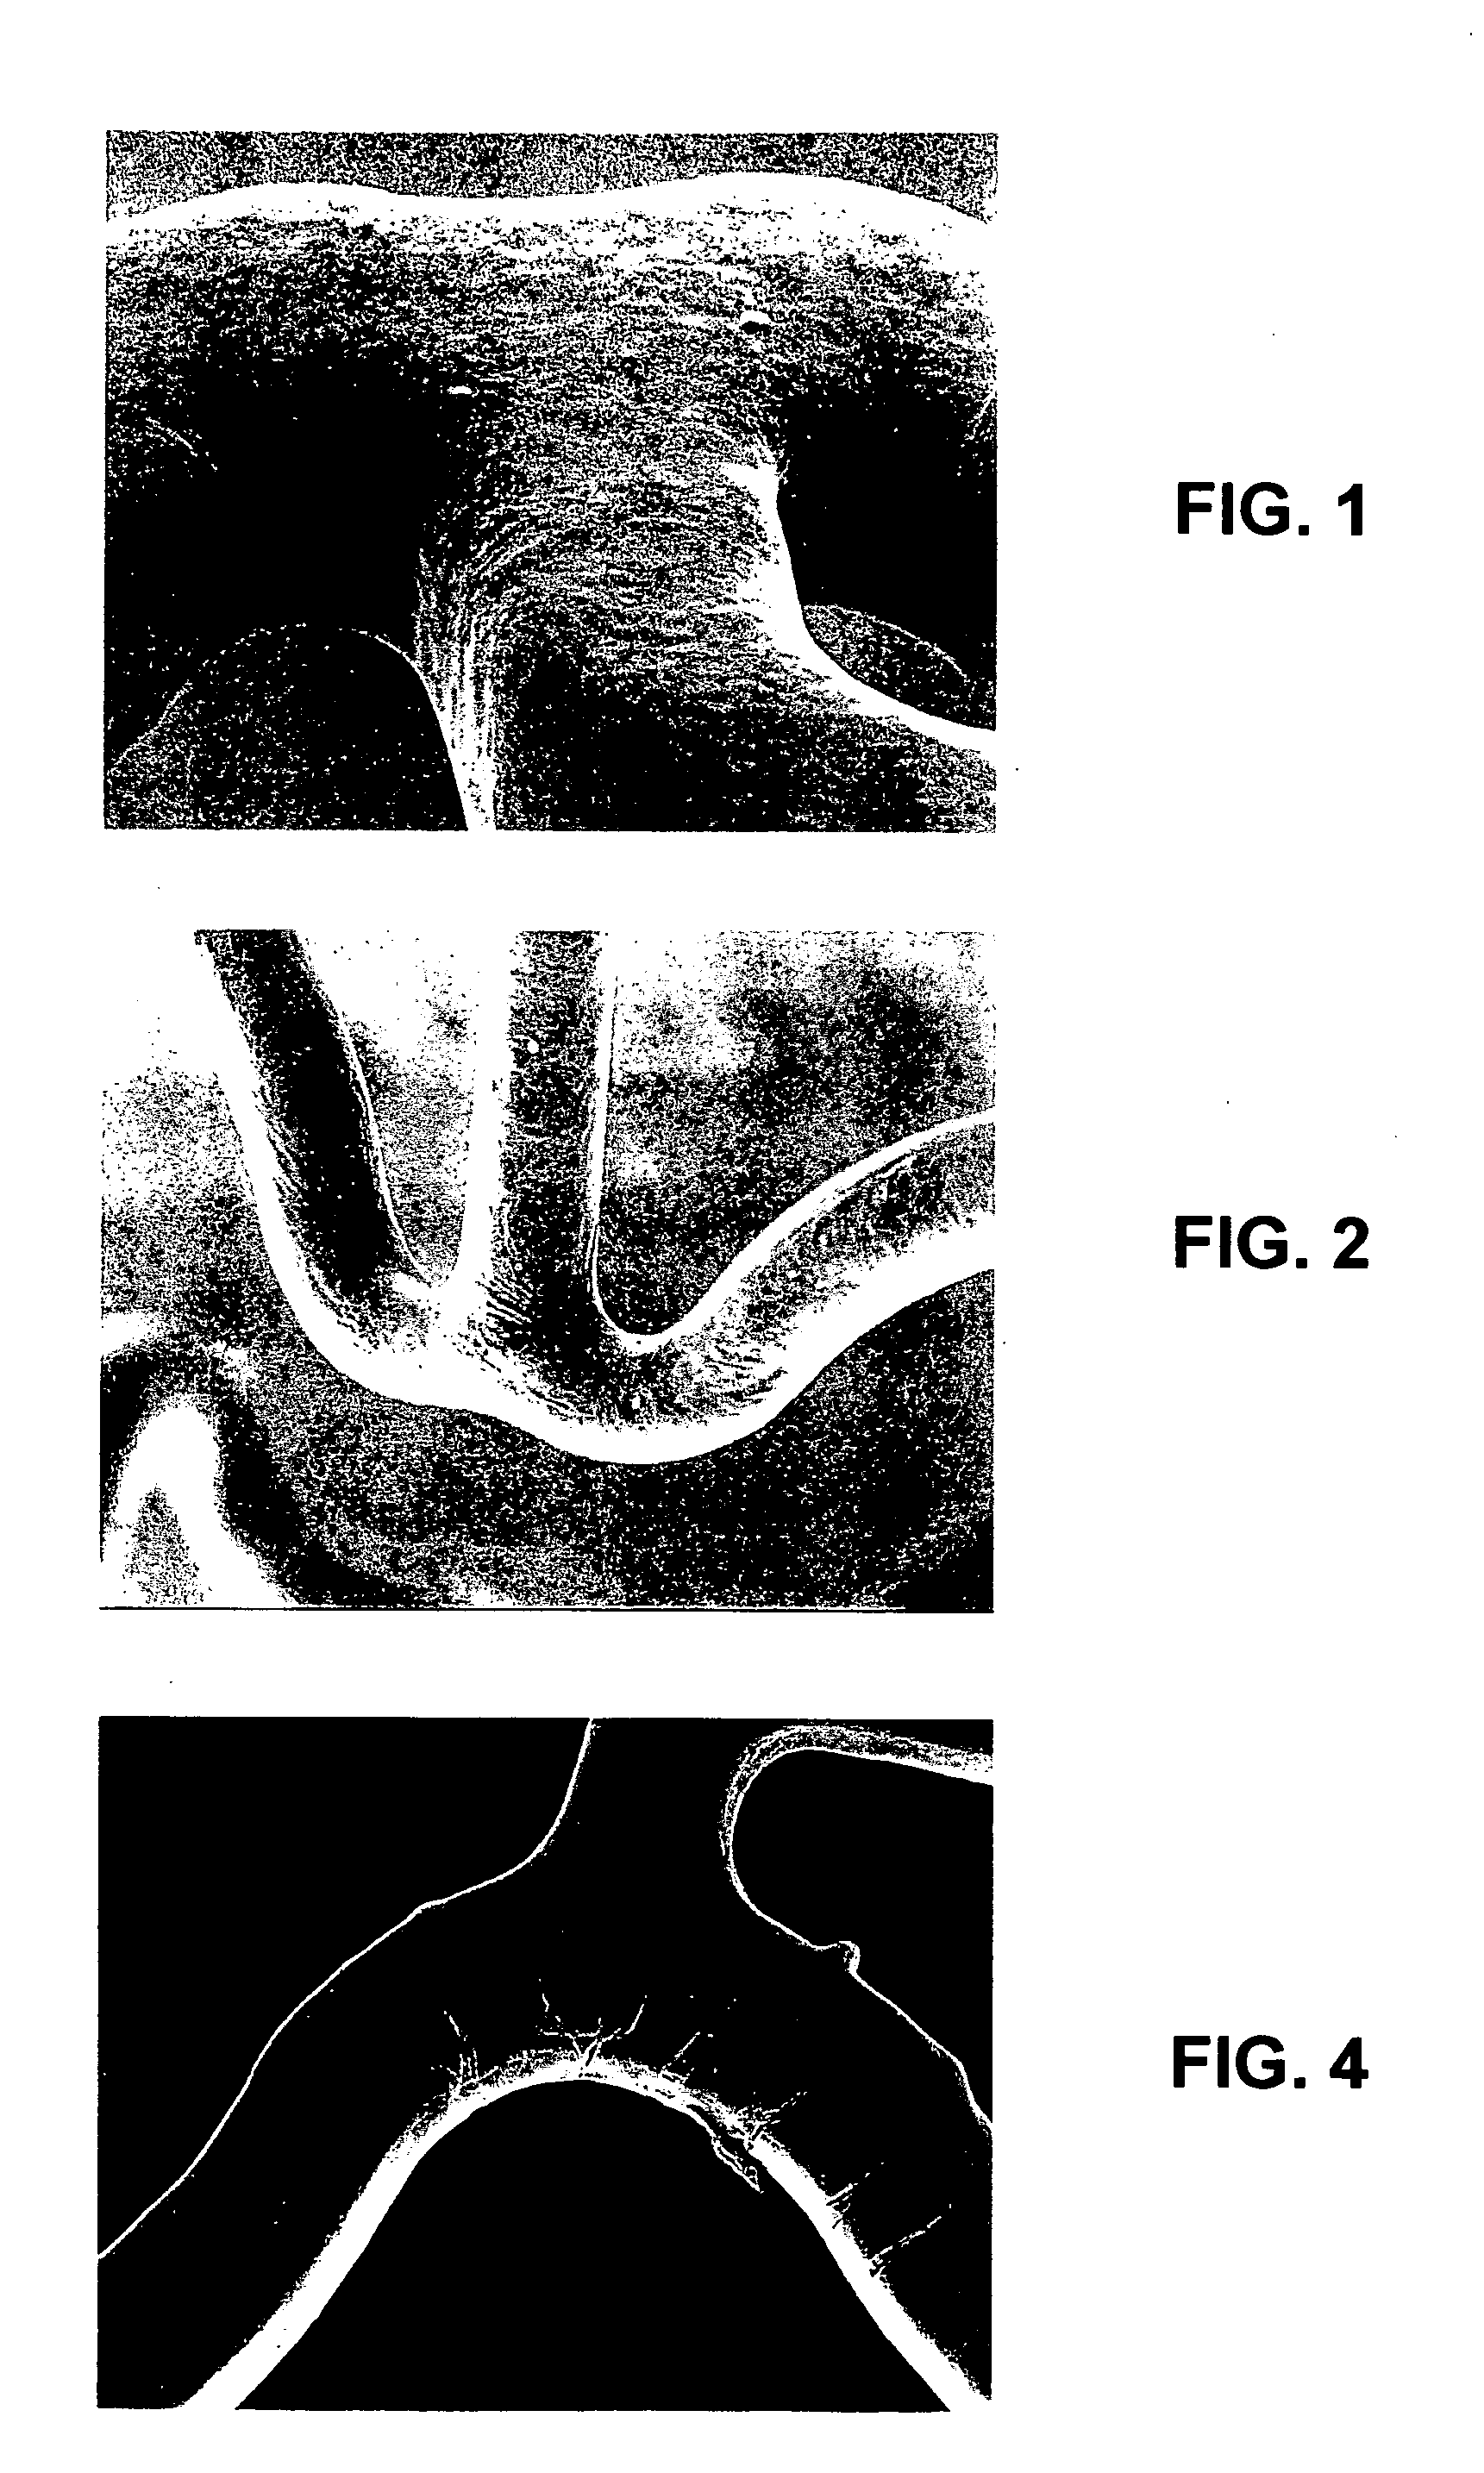 Coatings for implantable devices including biologically erodable polyesters and methods for fabricating the same